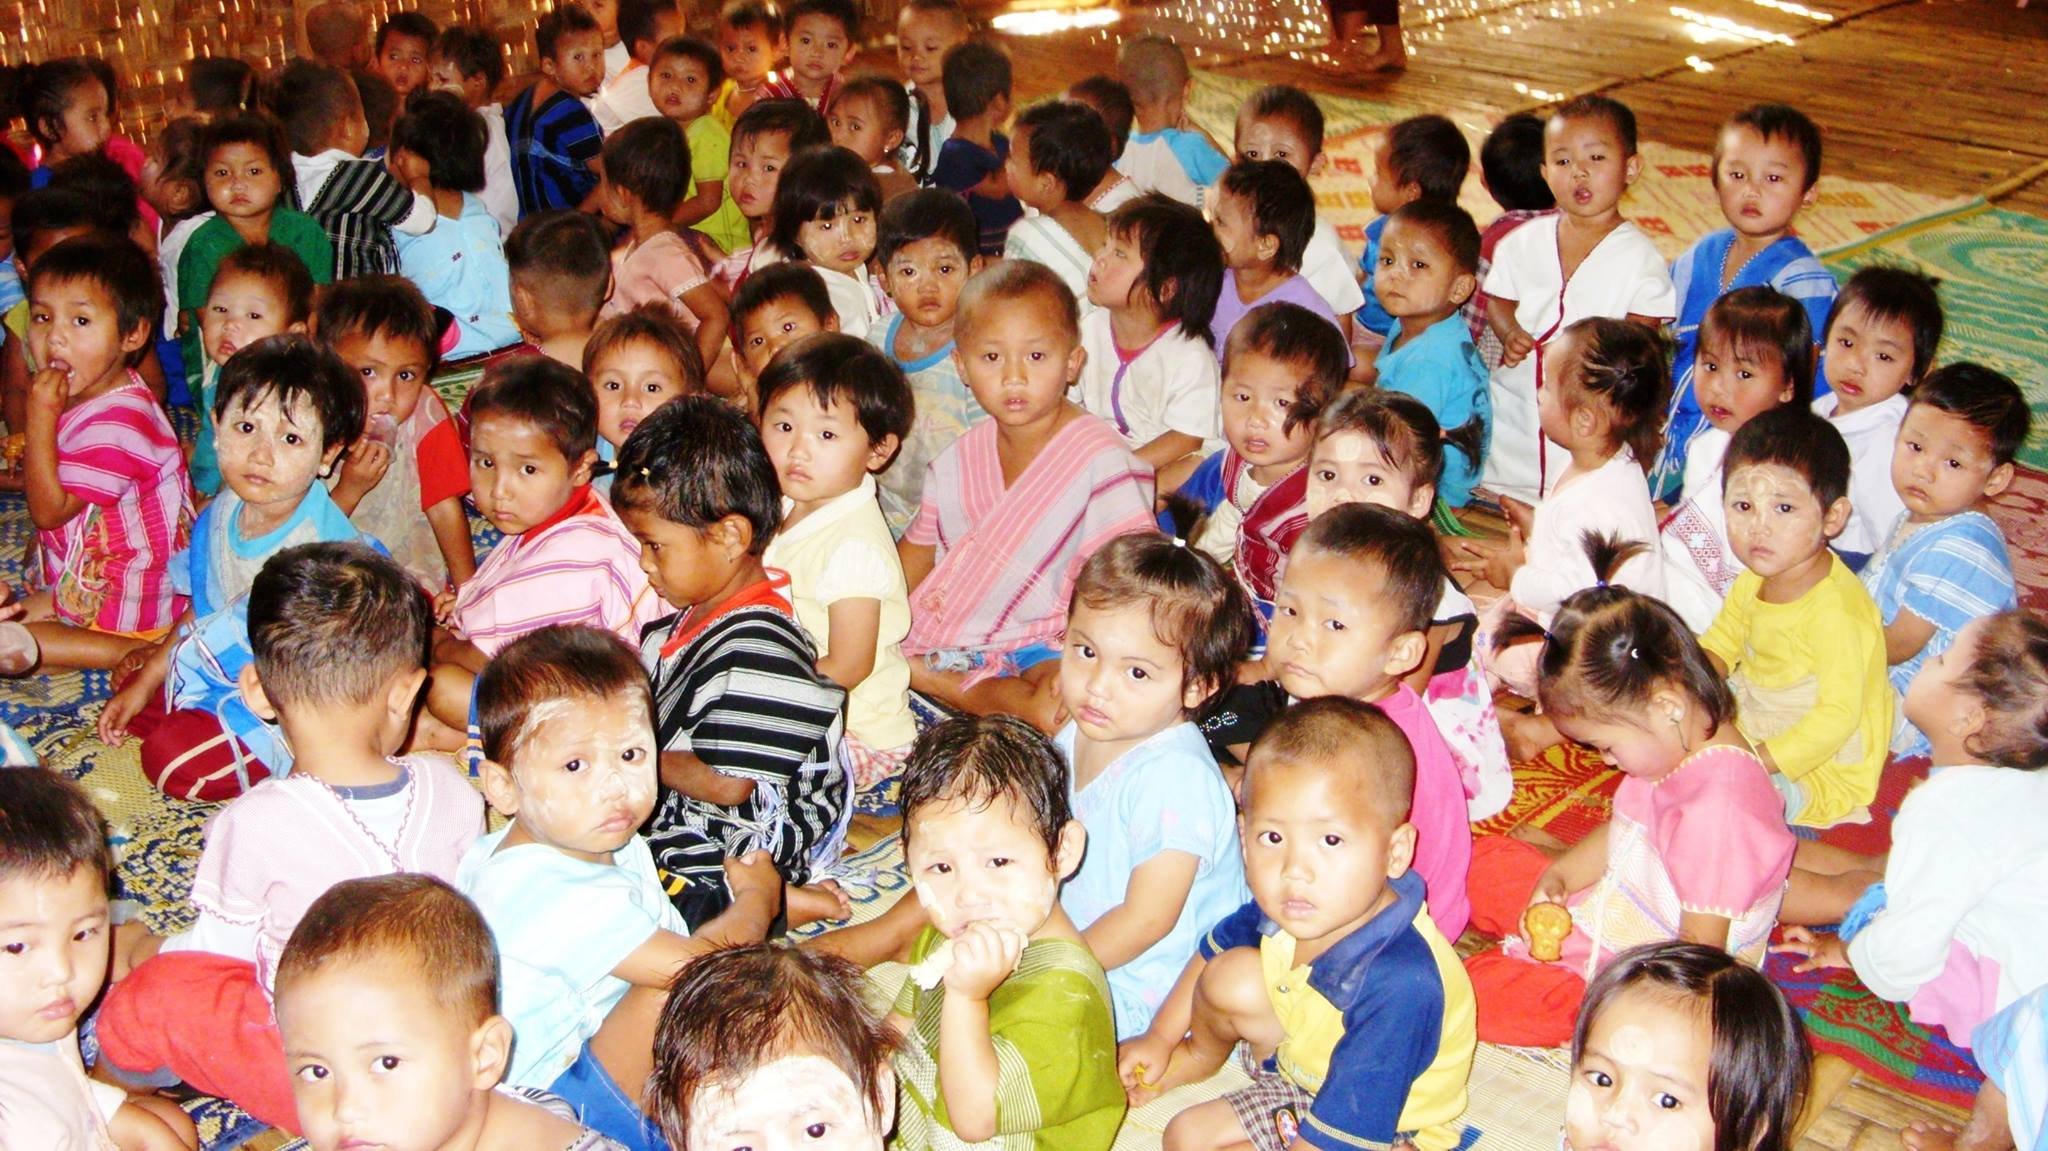 #KidzinKampz is a registered charity supporting children living in camps for displaced people along the Thai/Burmese borders & supports the LS16 community.